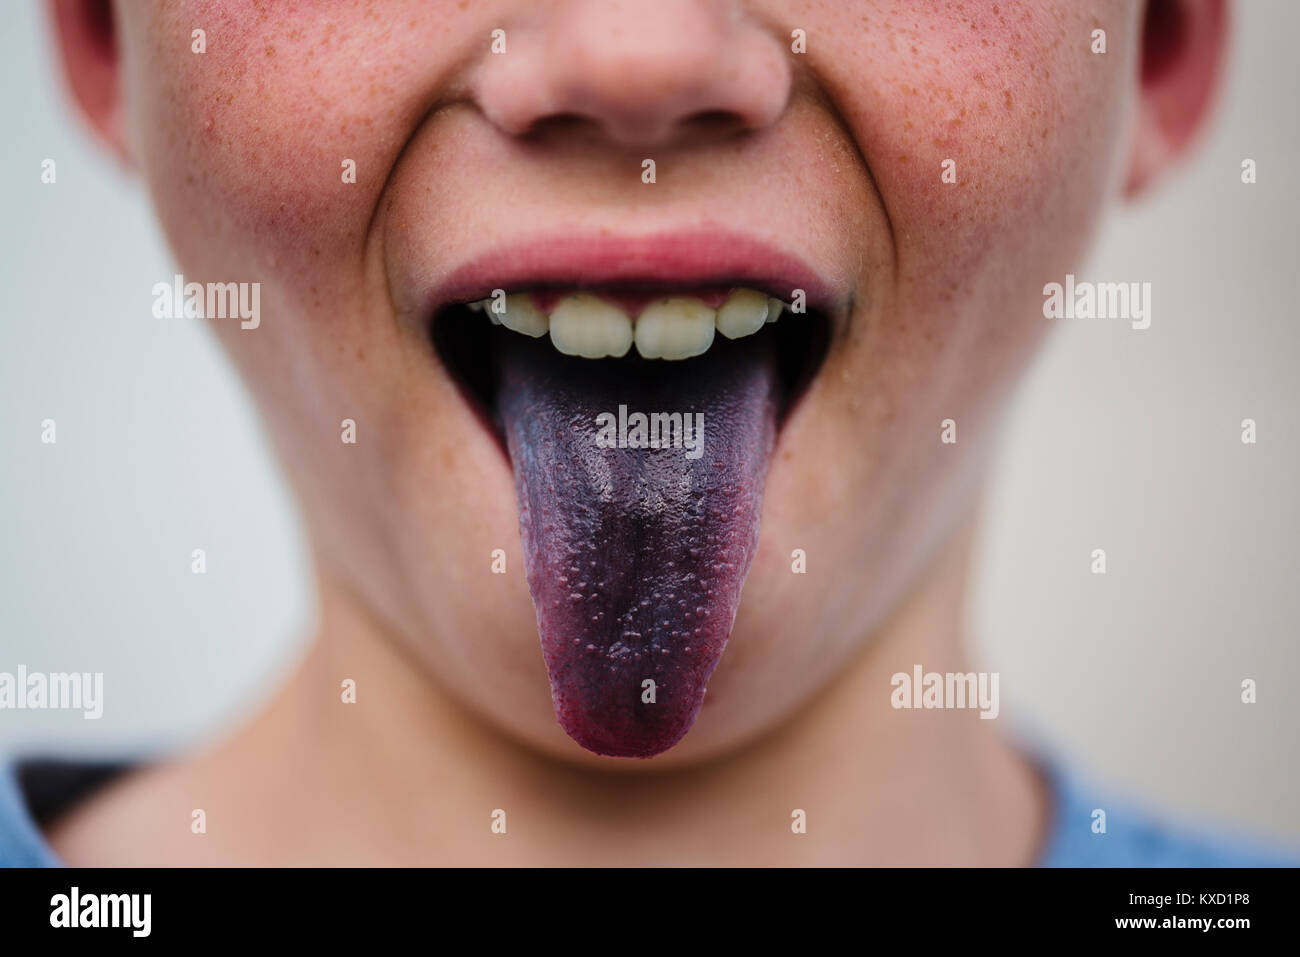 Midsection of boy sticking out purple tongue Stock Photo